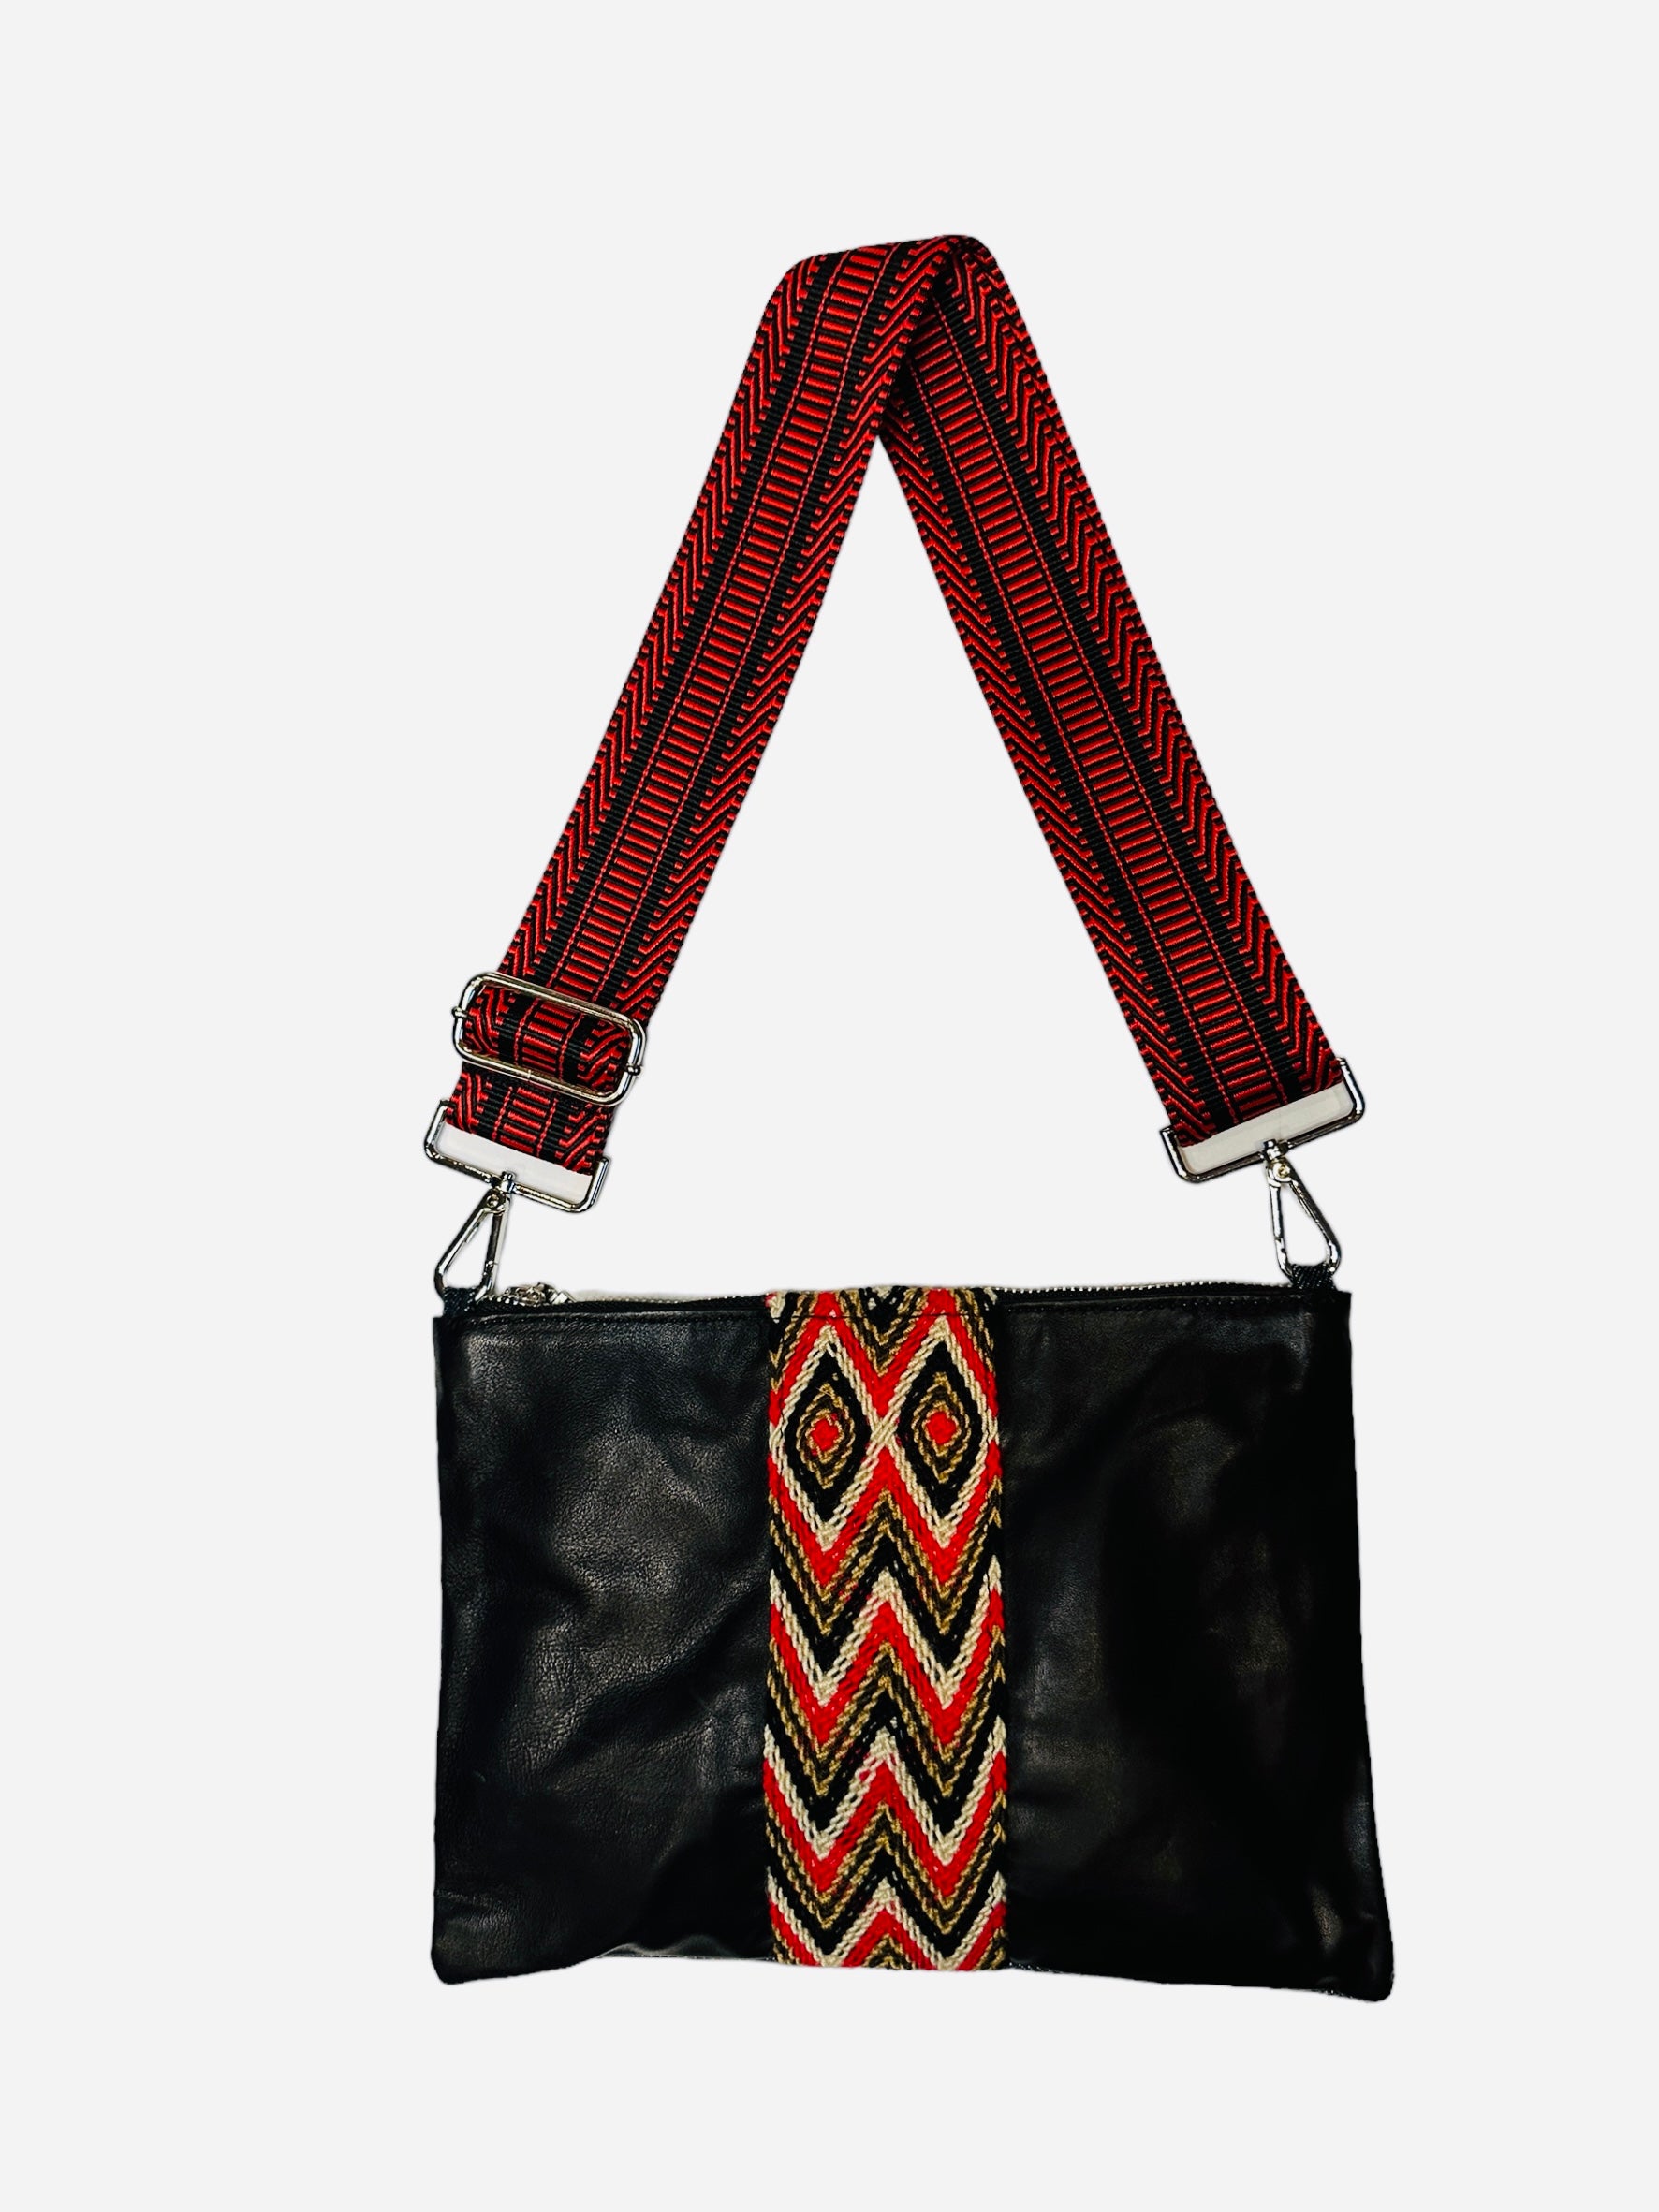 Mina Crossbody bag- the crossbody bag that takes you from work, errands to happy hour!